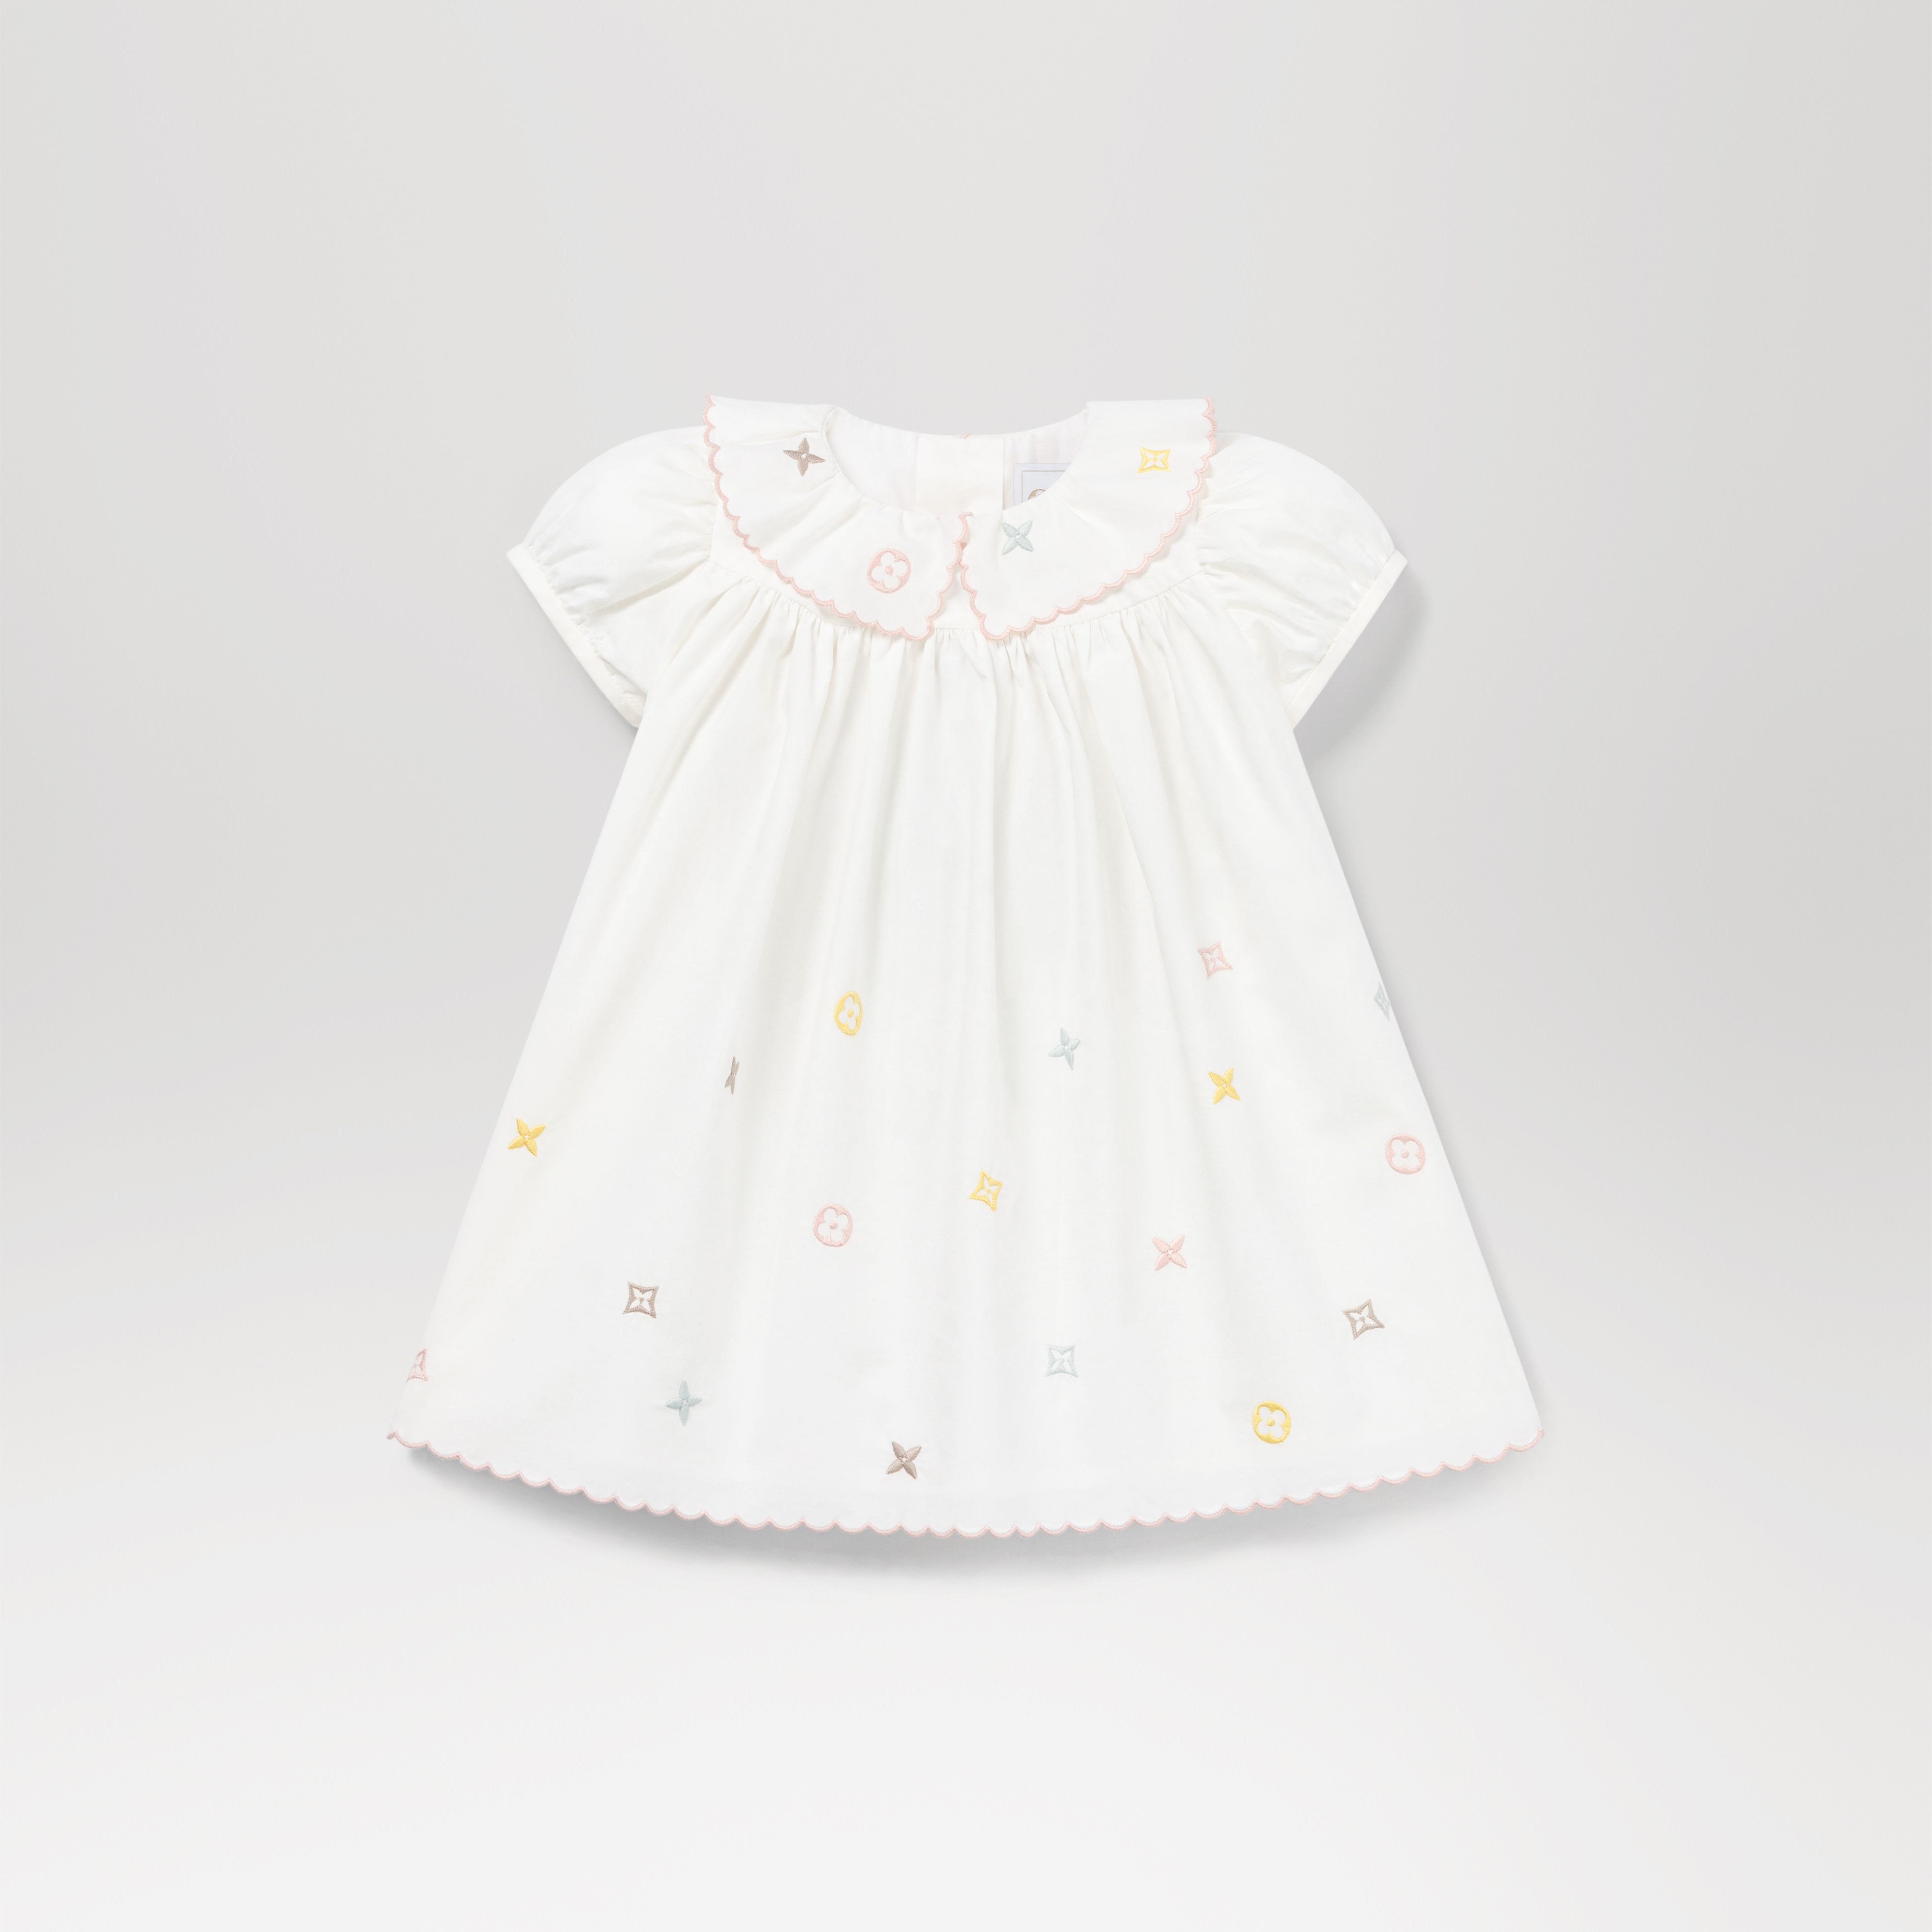 All the details about Louis Vuitton's first collection for babies -  HIGHXTAR.